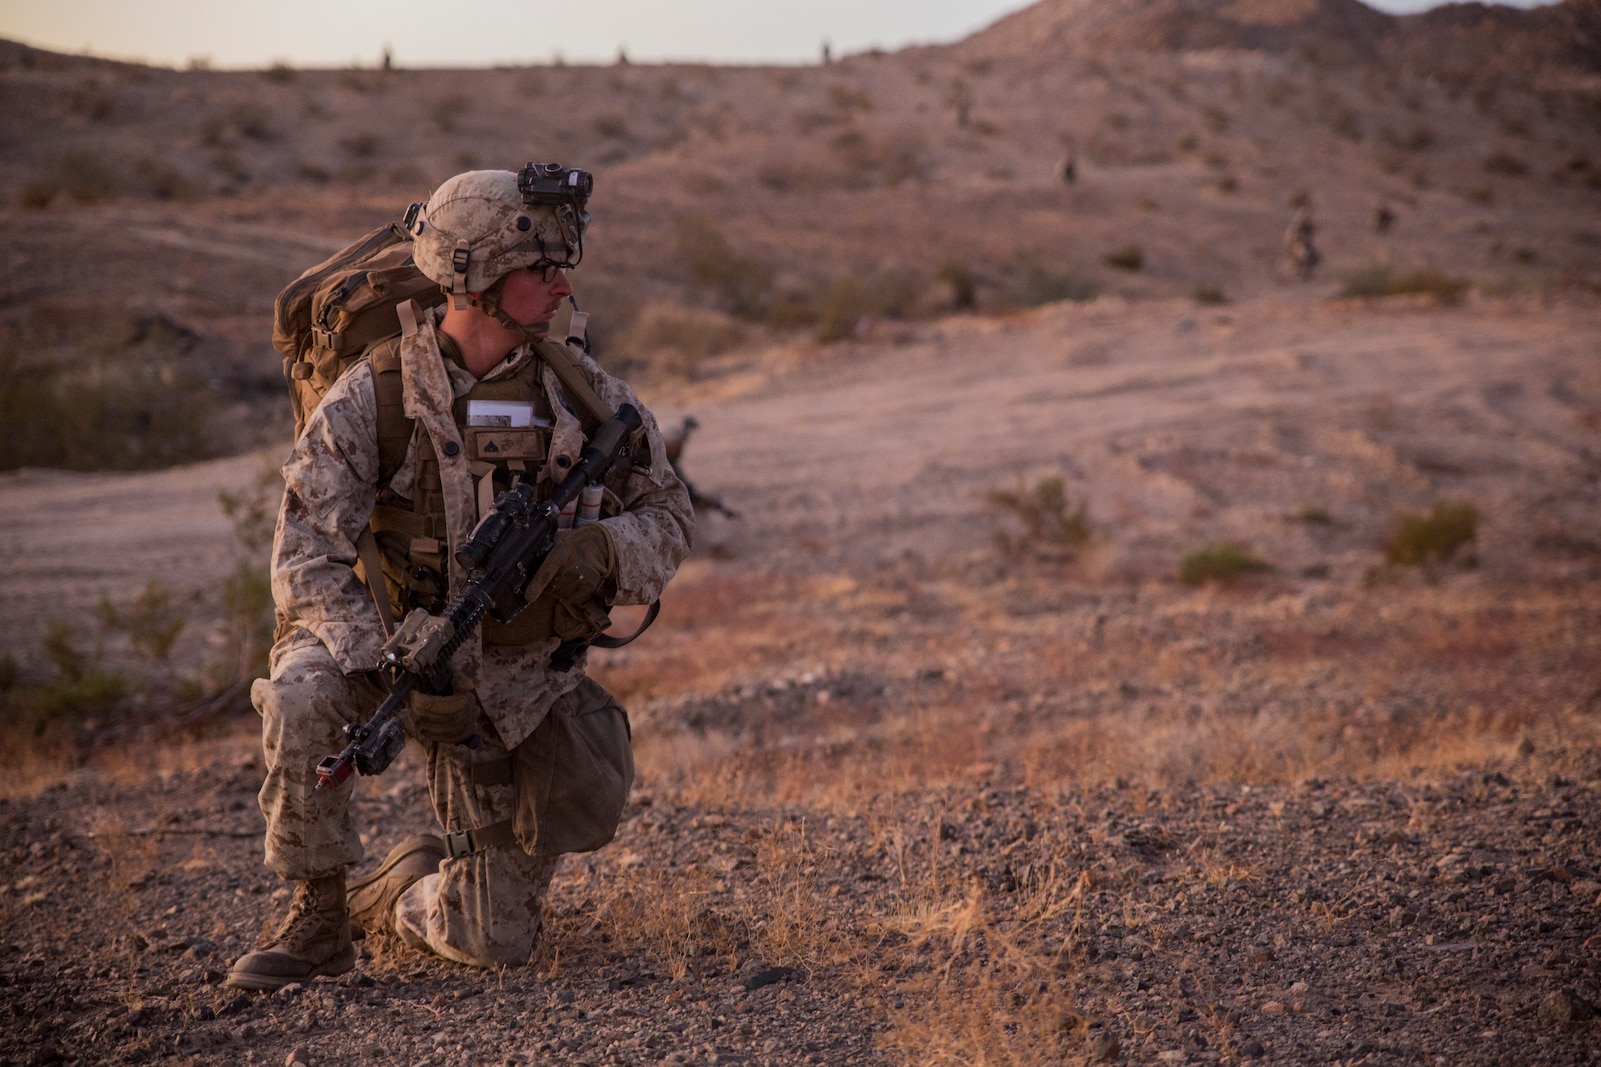 U.S. Marine Corps Cpl. Tanner Reihm, a squad leader with 3rd Battalion, 7th Marine Regiment, 1st Marine Division, provides security during a Marine Corps Combat Readiness Evaluation (MCCRE) at Marine Corps Air Ground Combat Center, Twentynine Palms, Calif., Nov. 28, 2017.